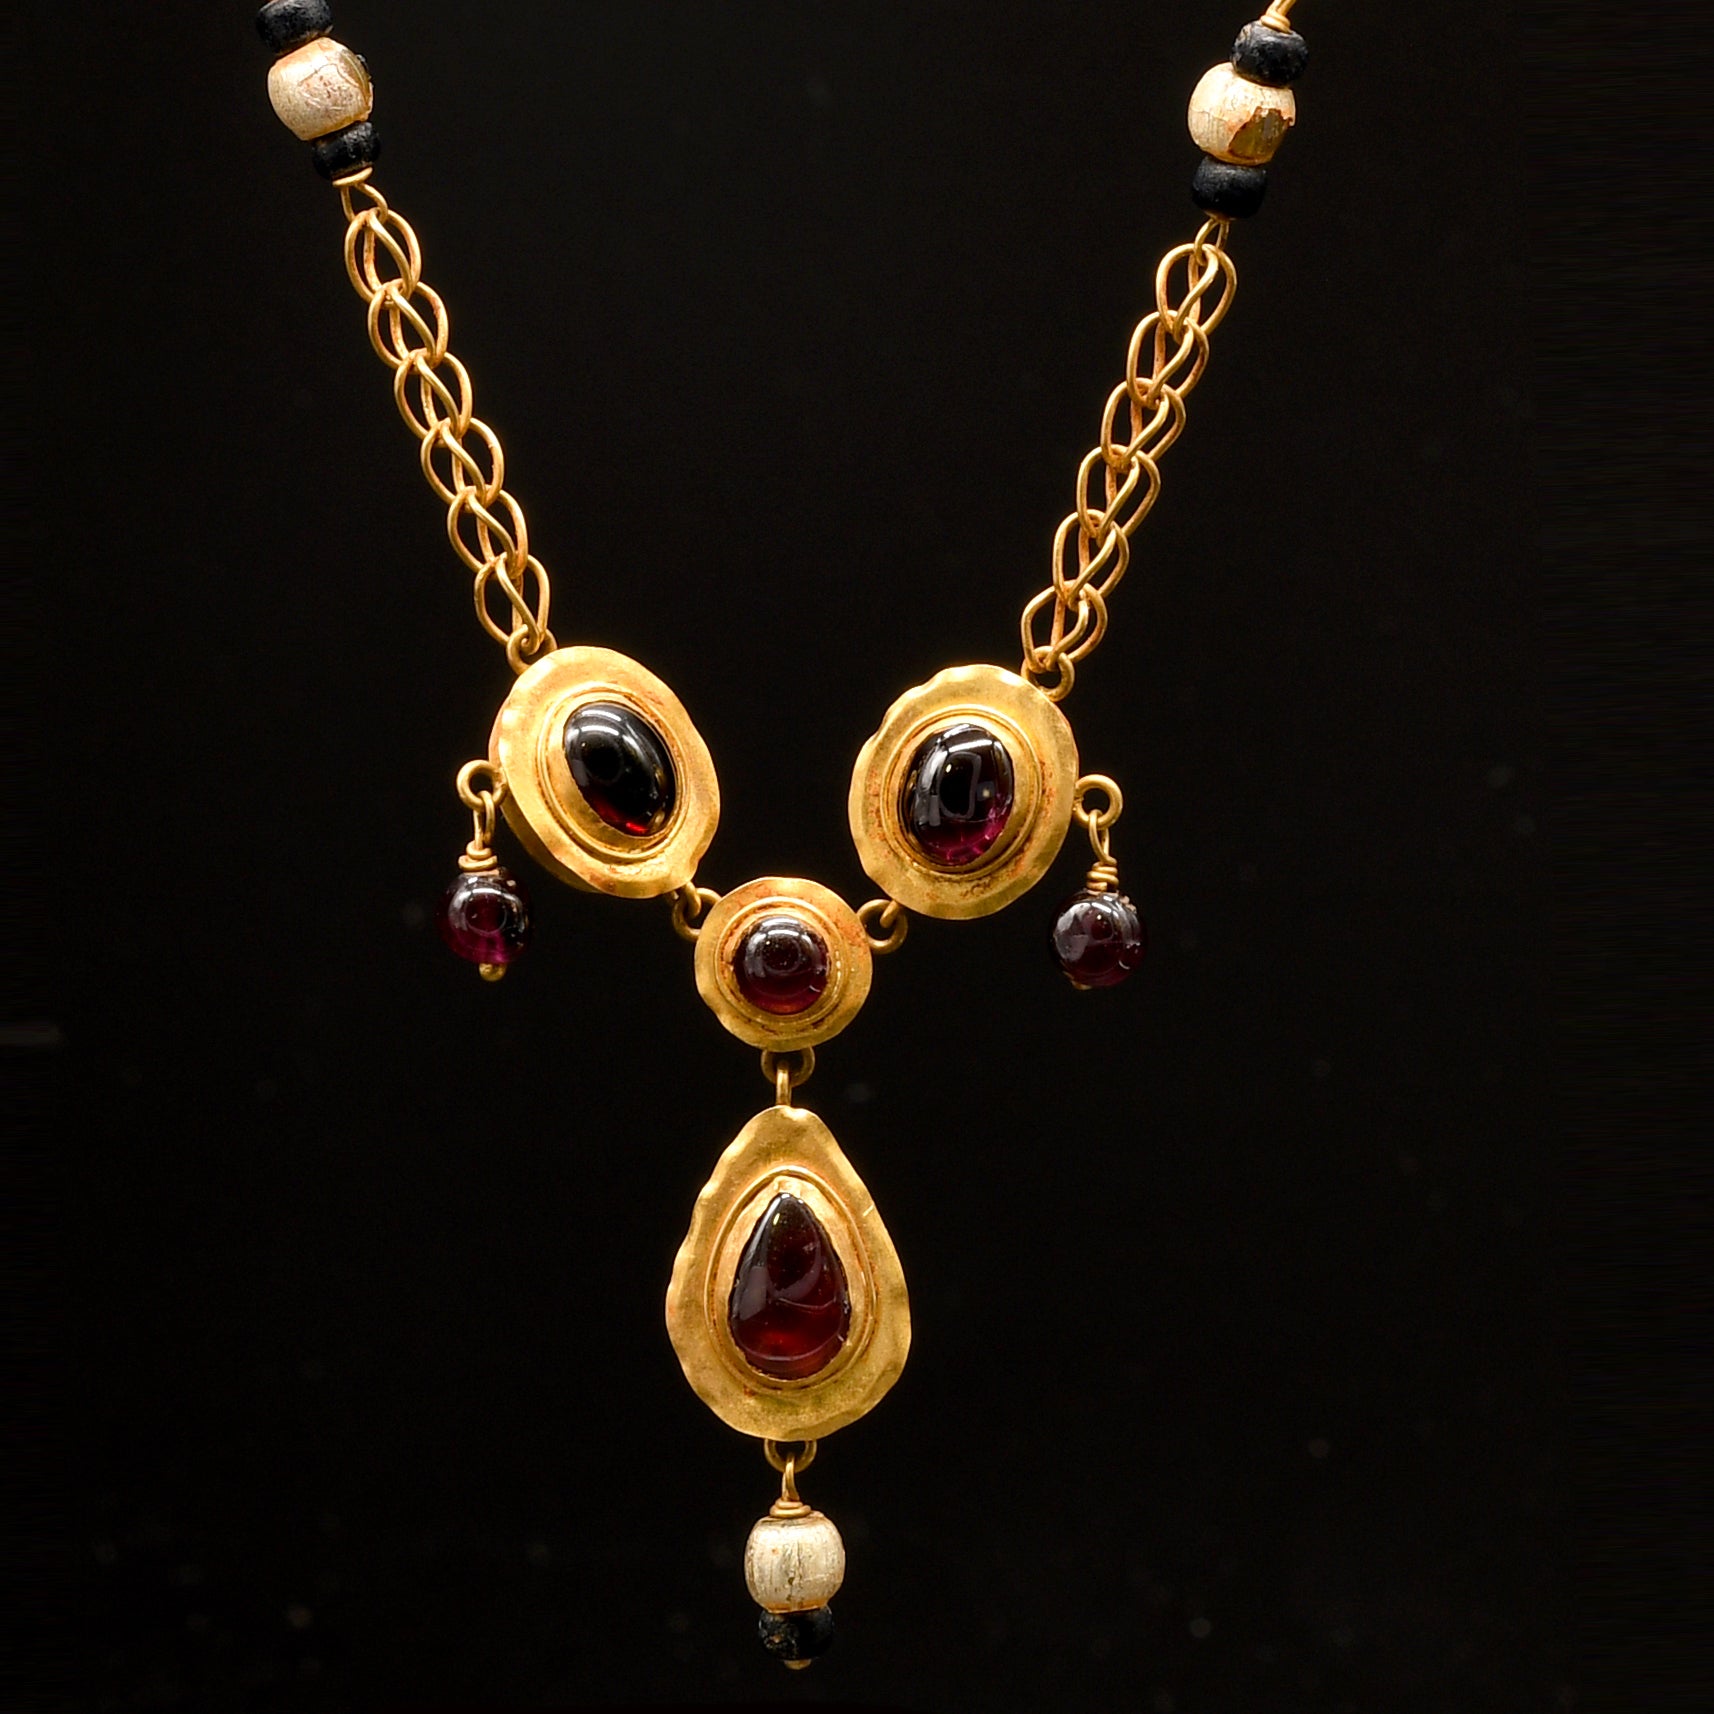 A Hellenistic Gold, Garnet & Pearl Necklace, ca. 1st century BCE